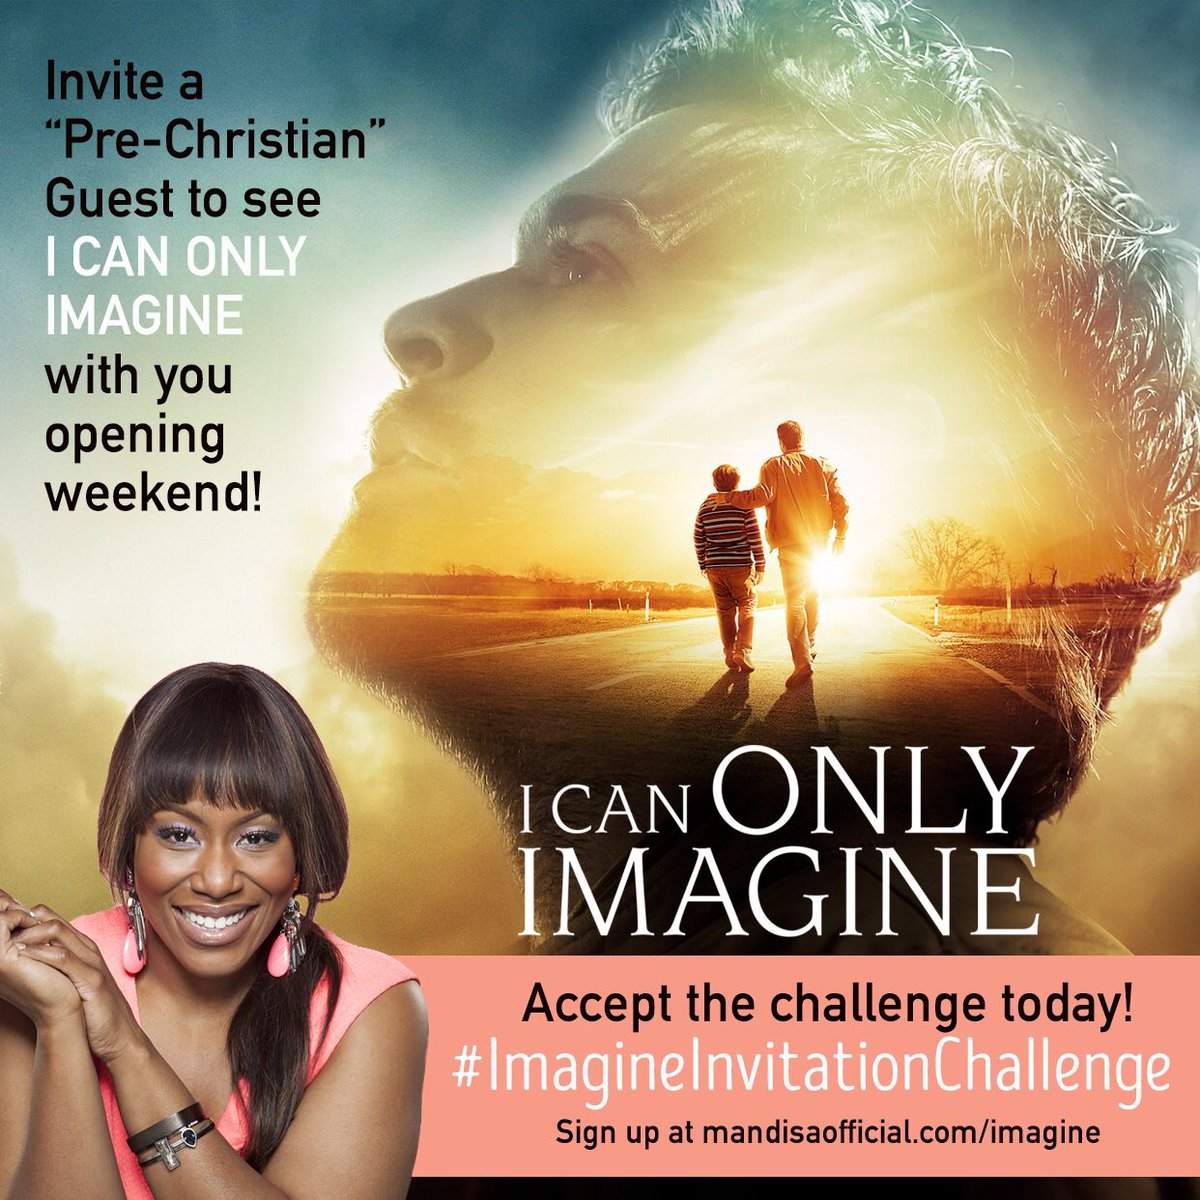 Fasting social media for 24 hours to pray for those taking my #ImagineInvitationChallenge to see #ICanOnlyImagine this weekend with a #PreChristian loved one. Believing God is gonna do great things! You can still sign up at mandisaofficial.com/imagine